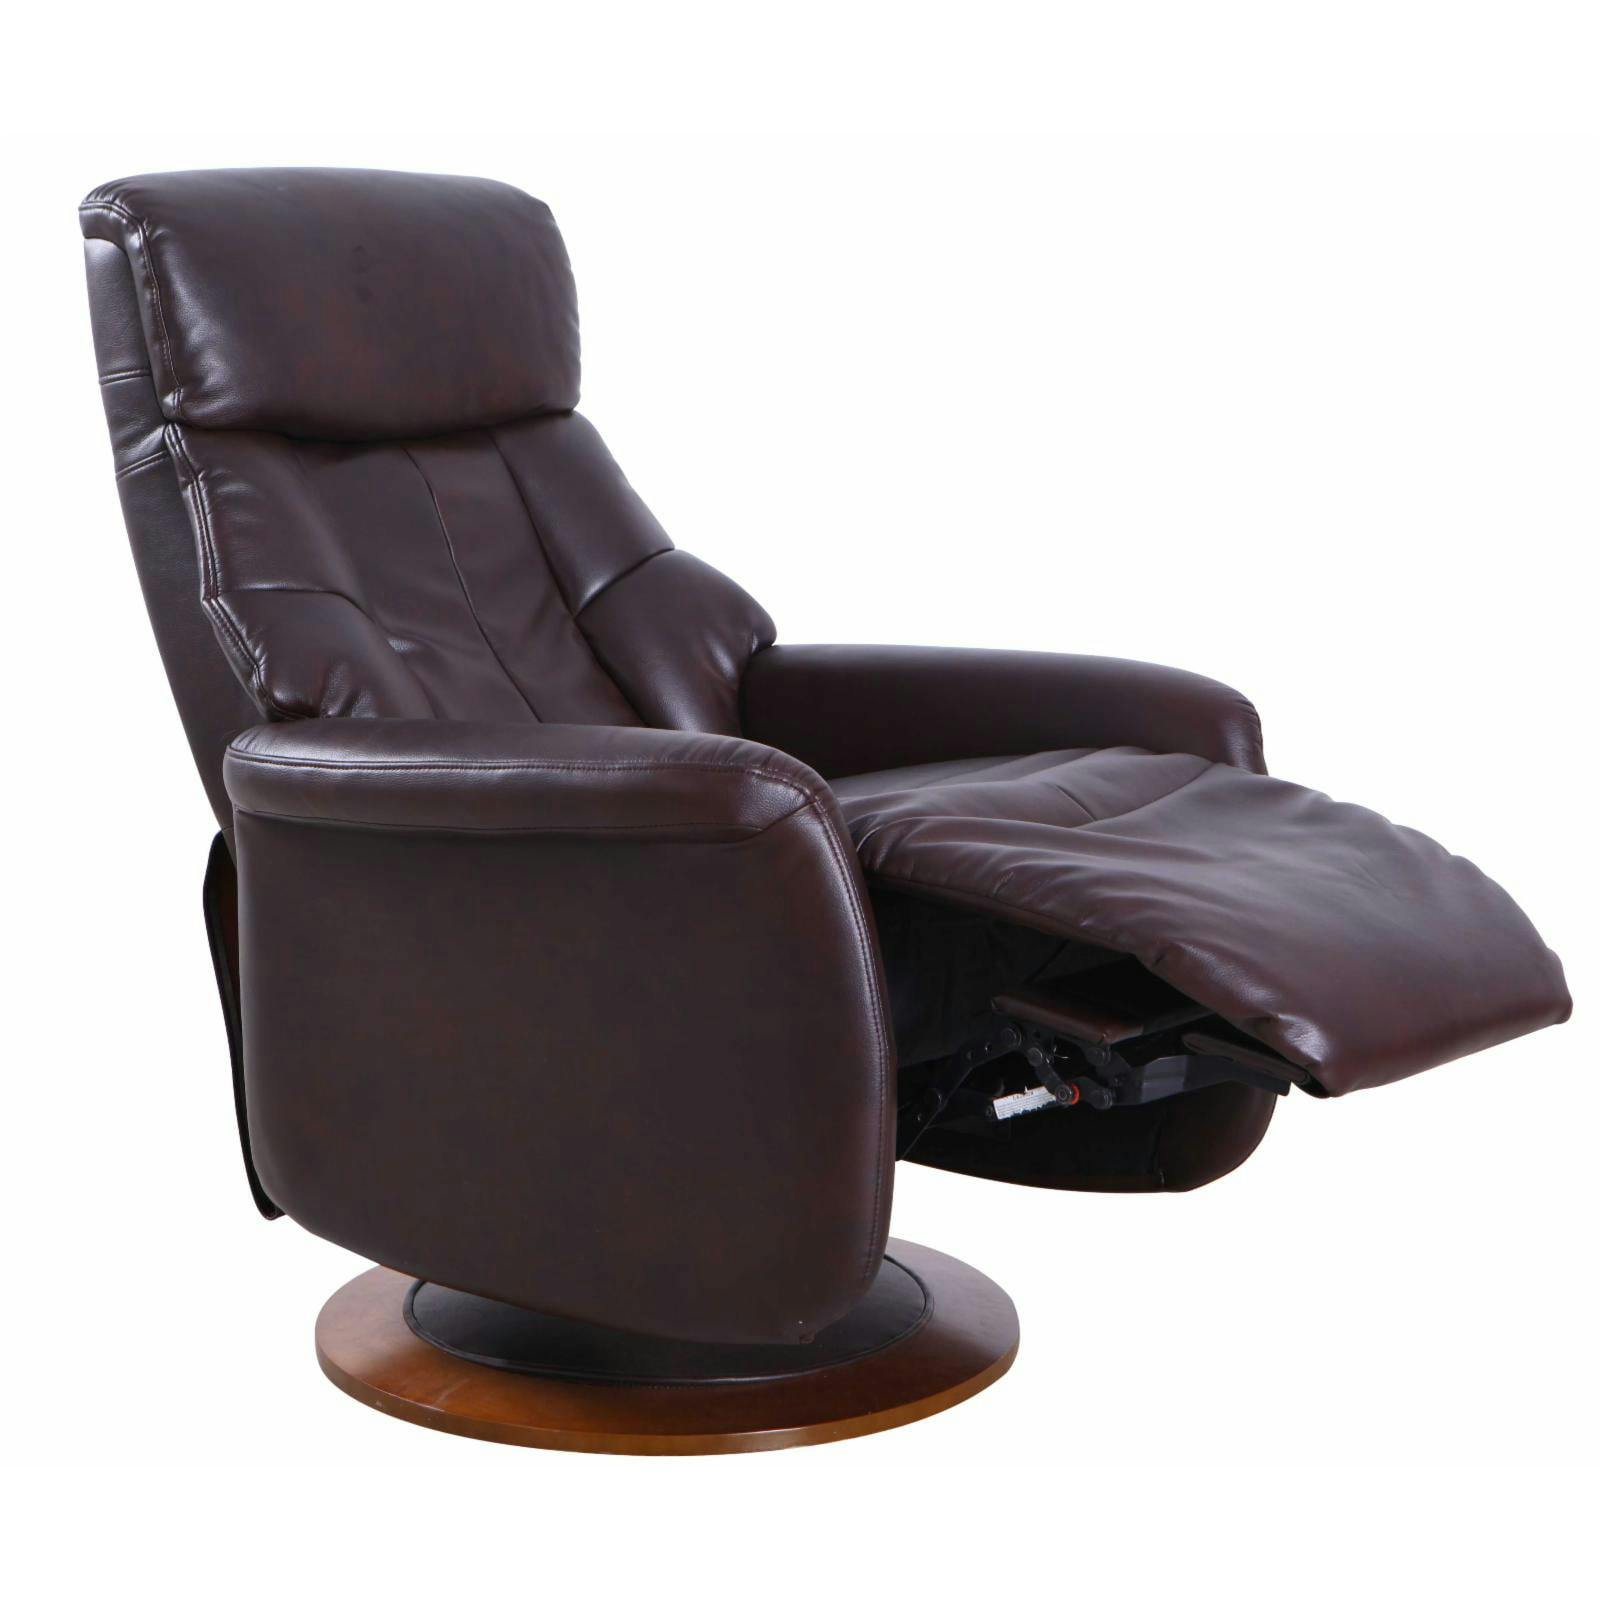 Espresso Swivel Recliner with Memory Foam and Walnut Accents